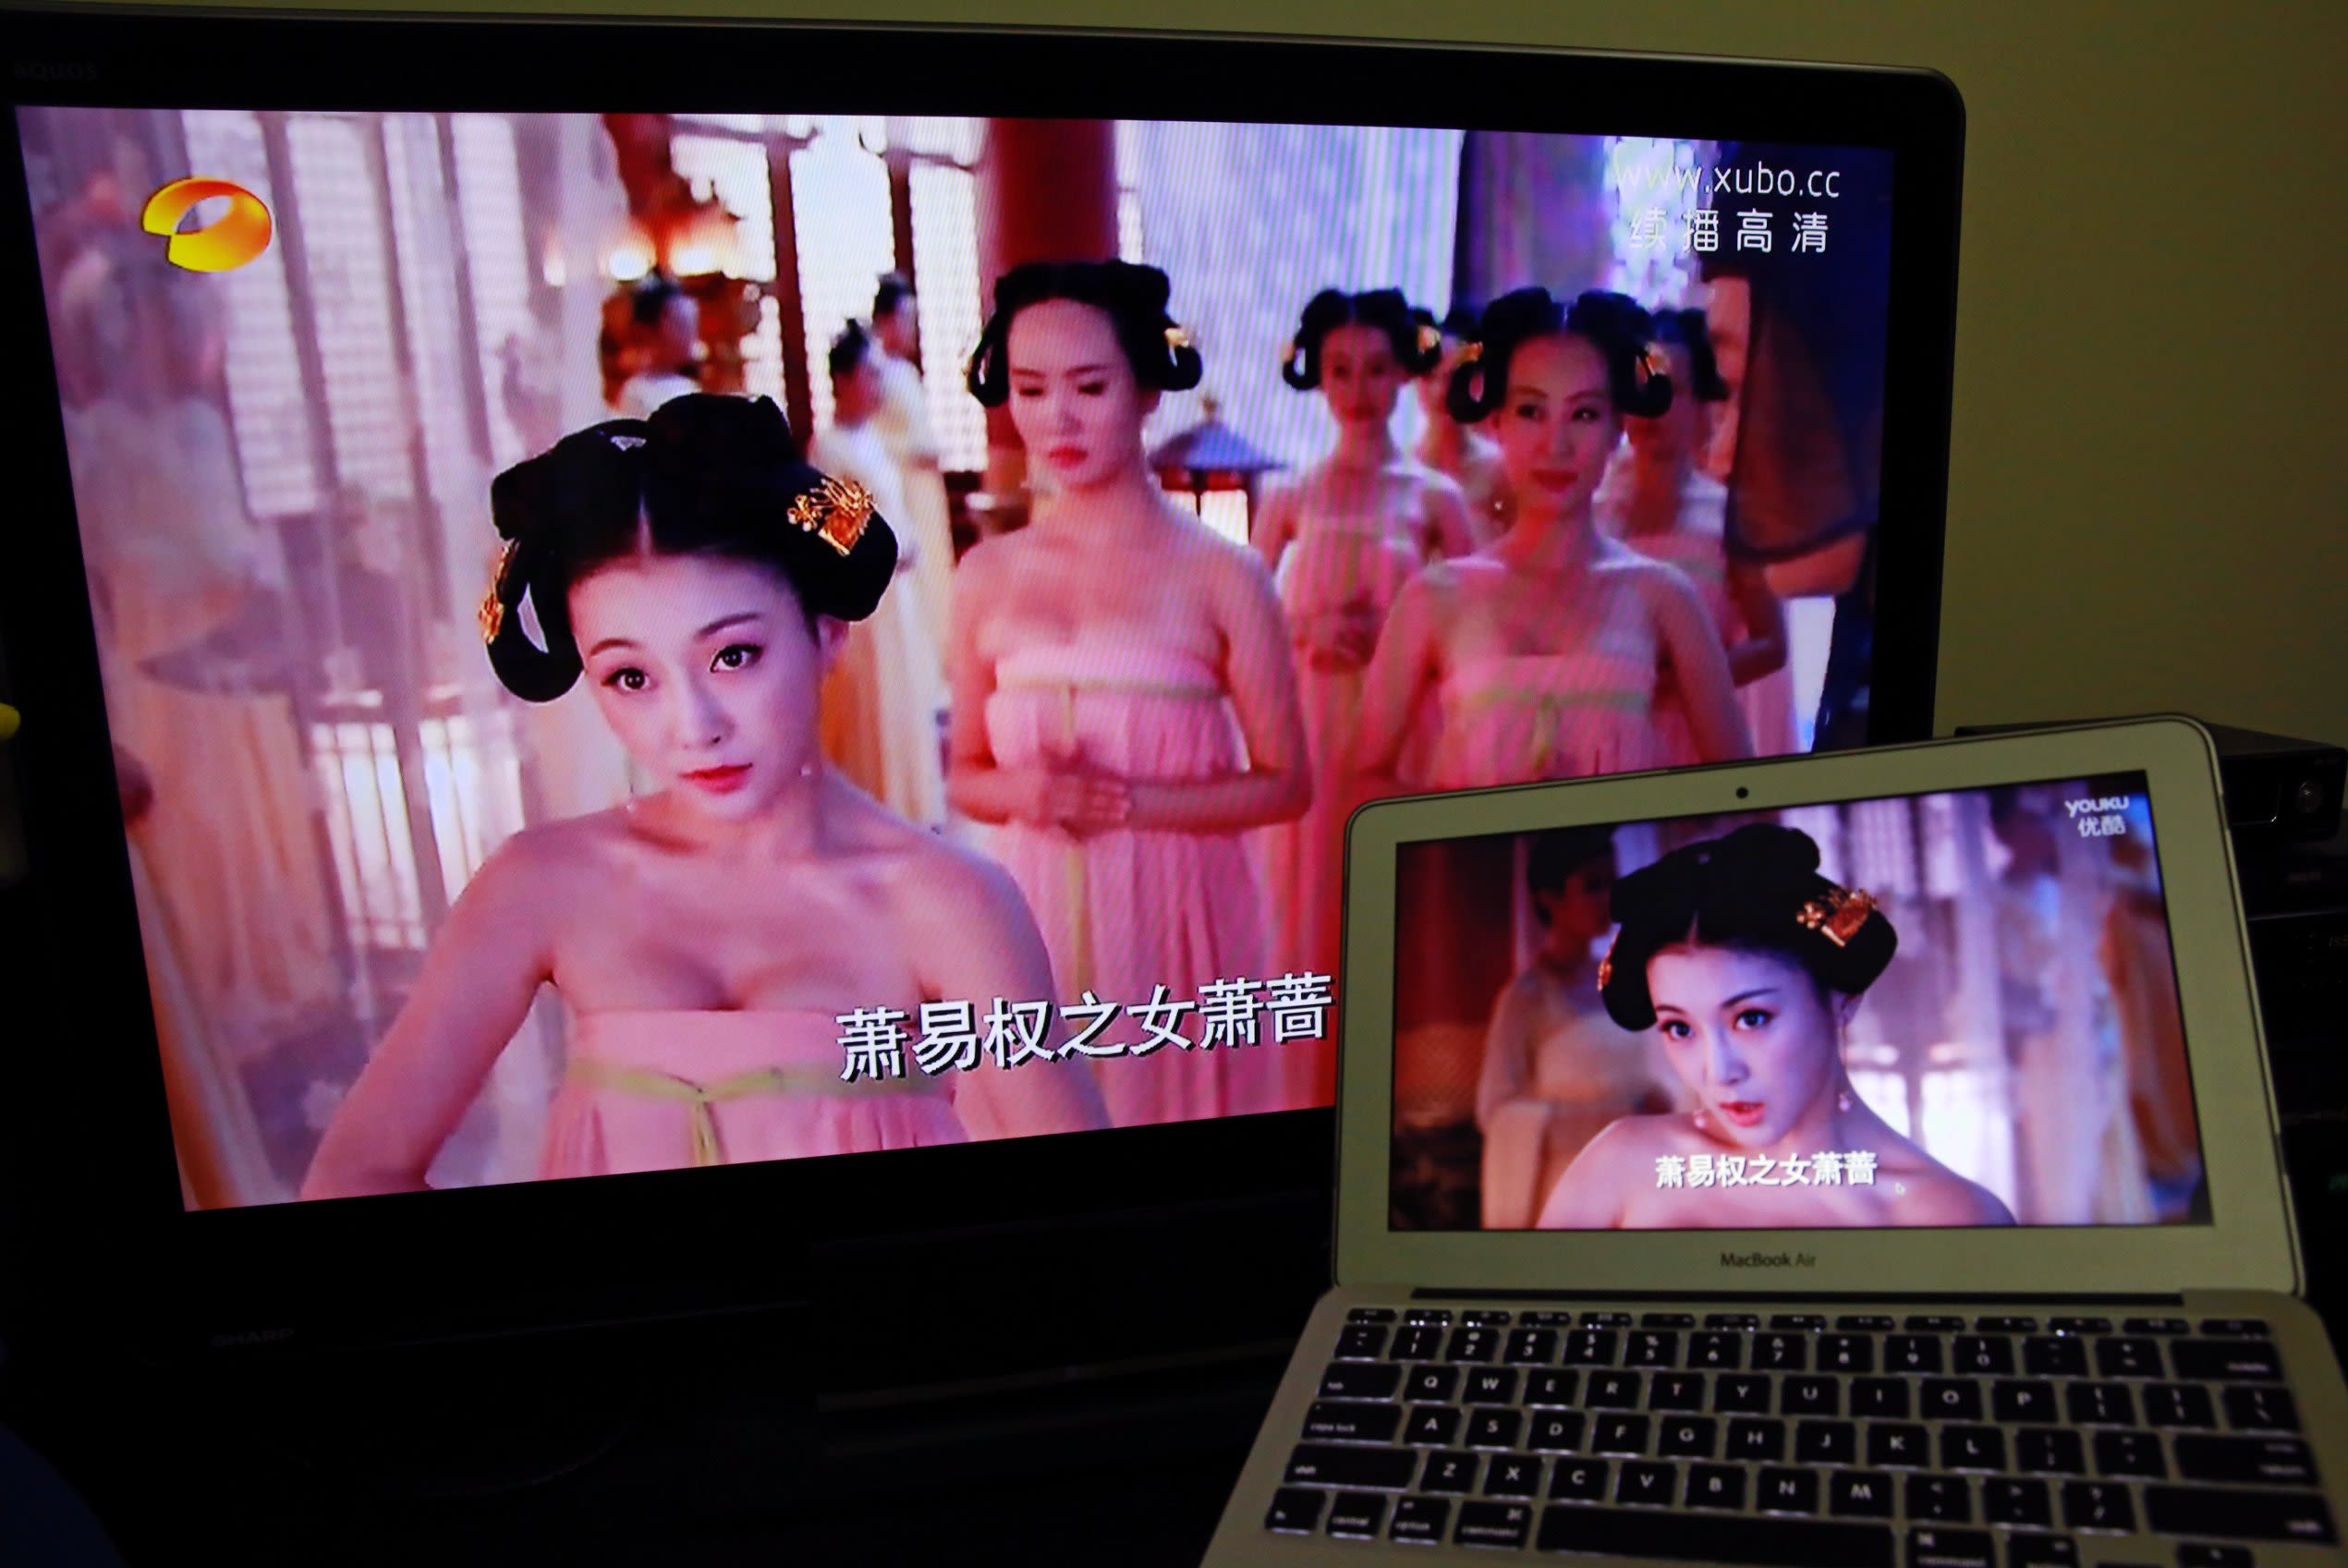 Chinese Forced Rap Sex Videos - China bans same-sex romance from TV screens | CNN